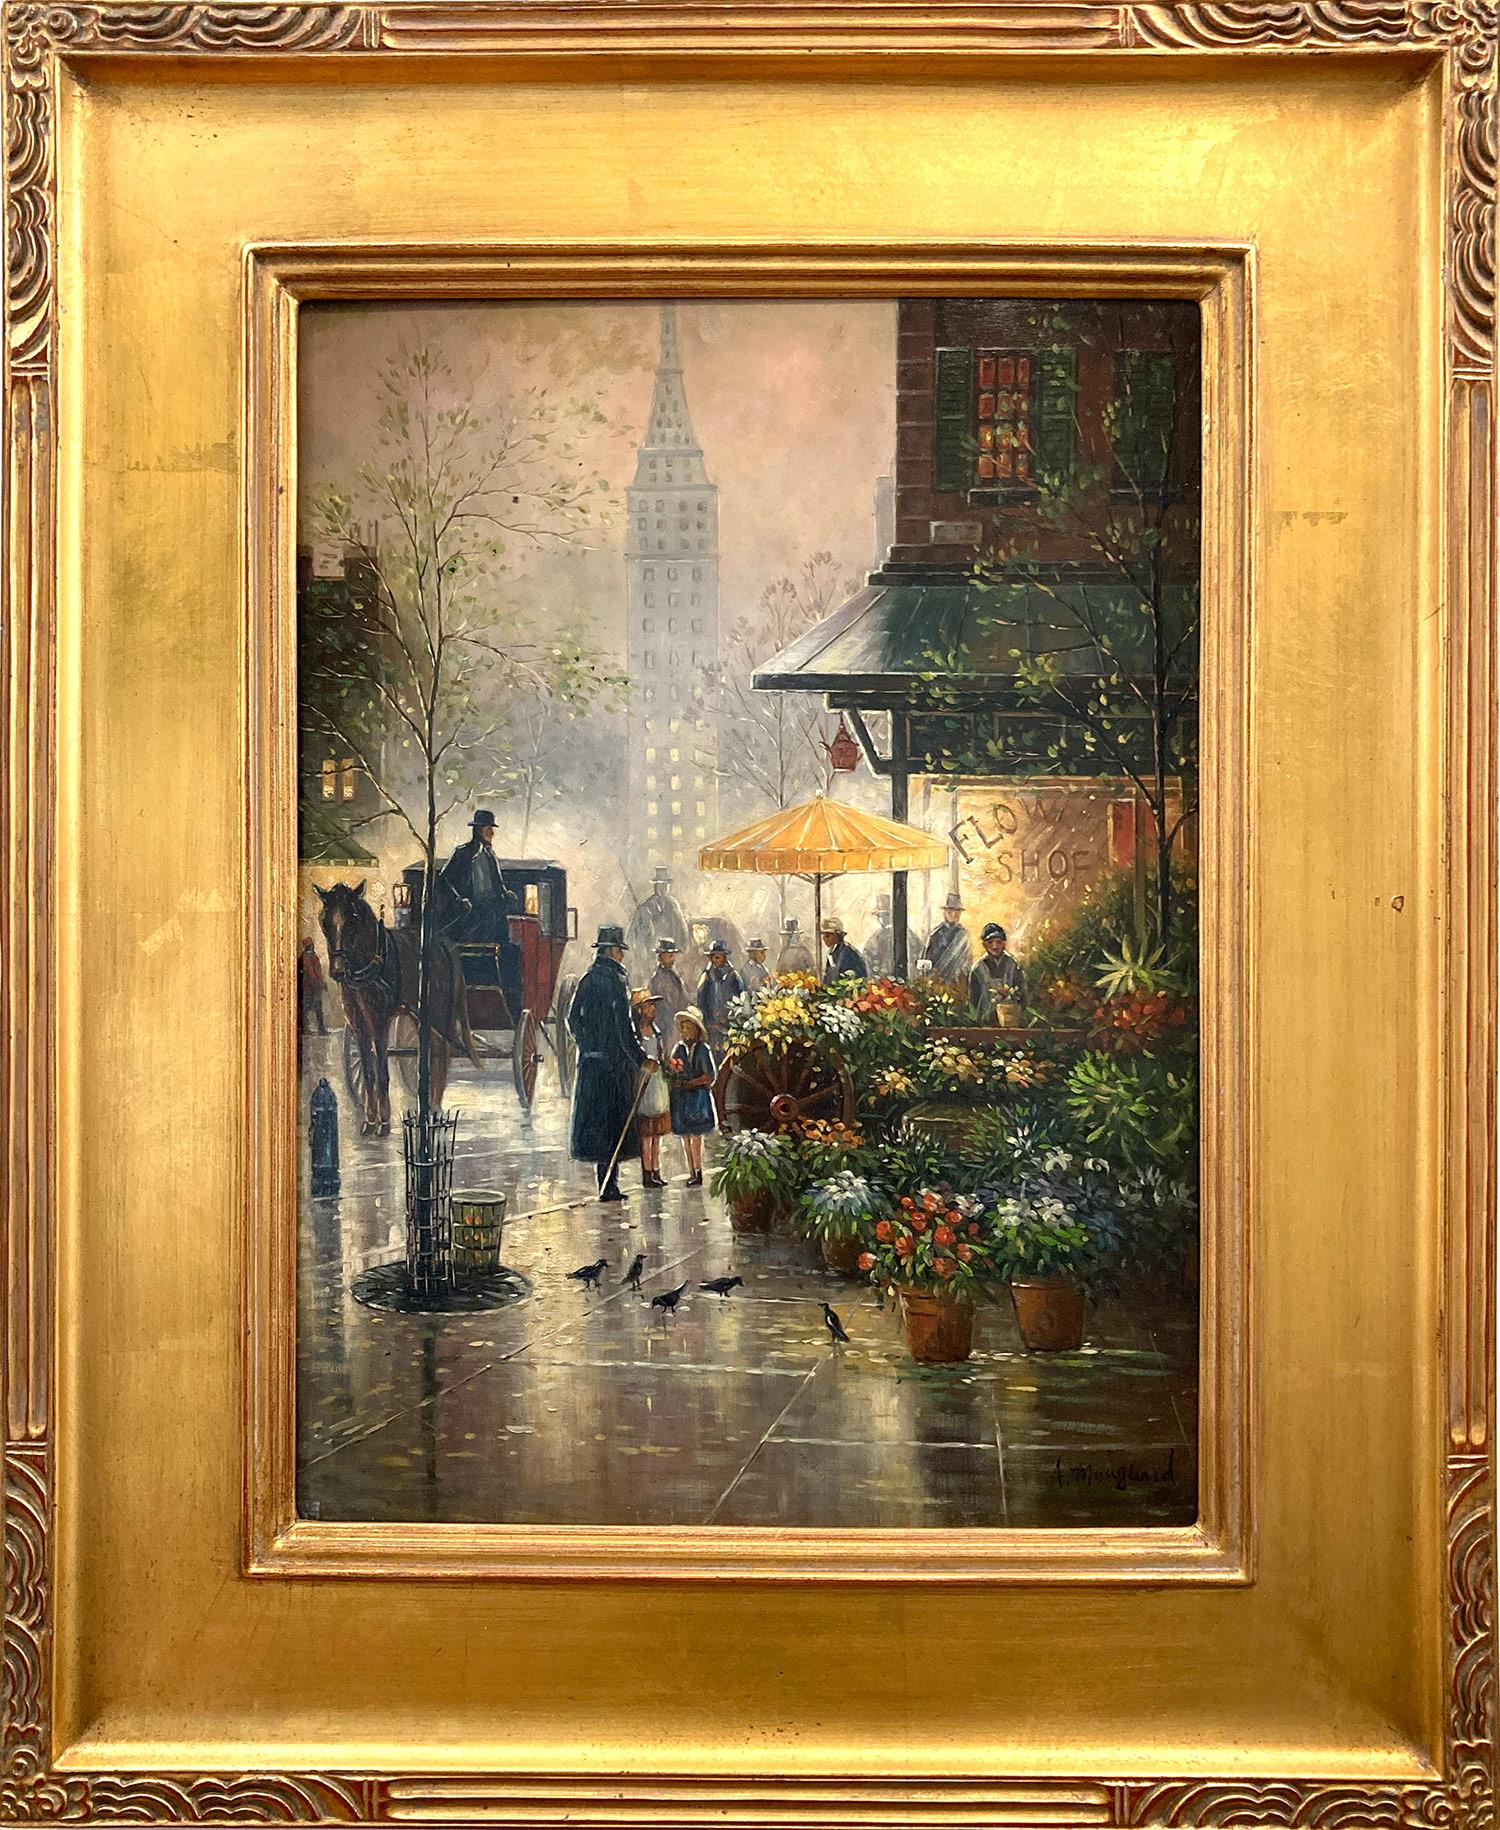 Albert Munghard Figurative Painting - "Flower Shop" Impressionistic City Scene Oil Painting by French-American Artist